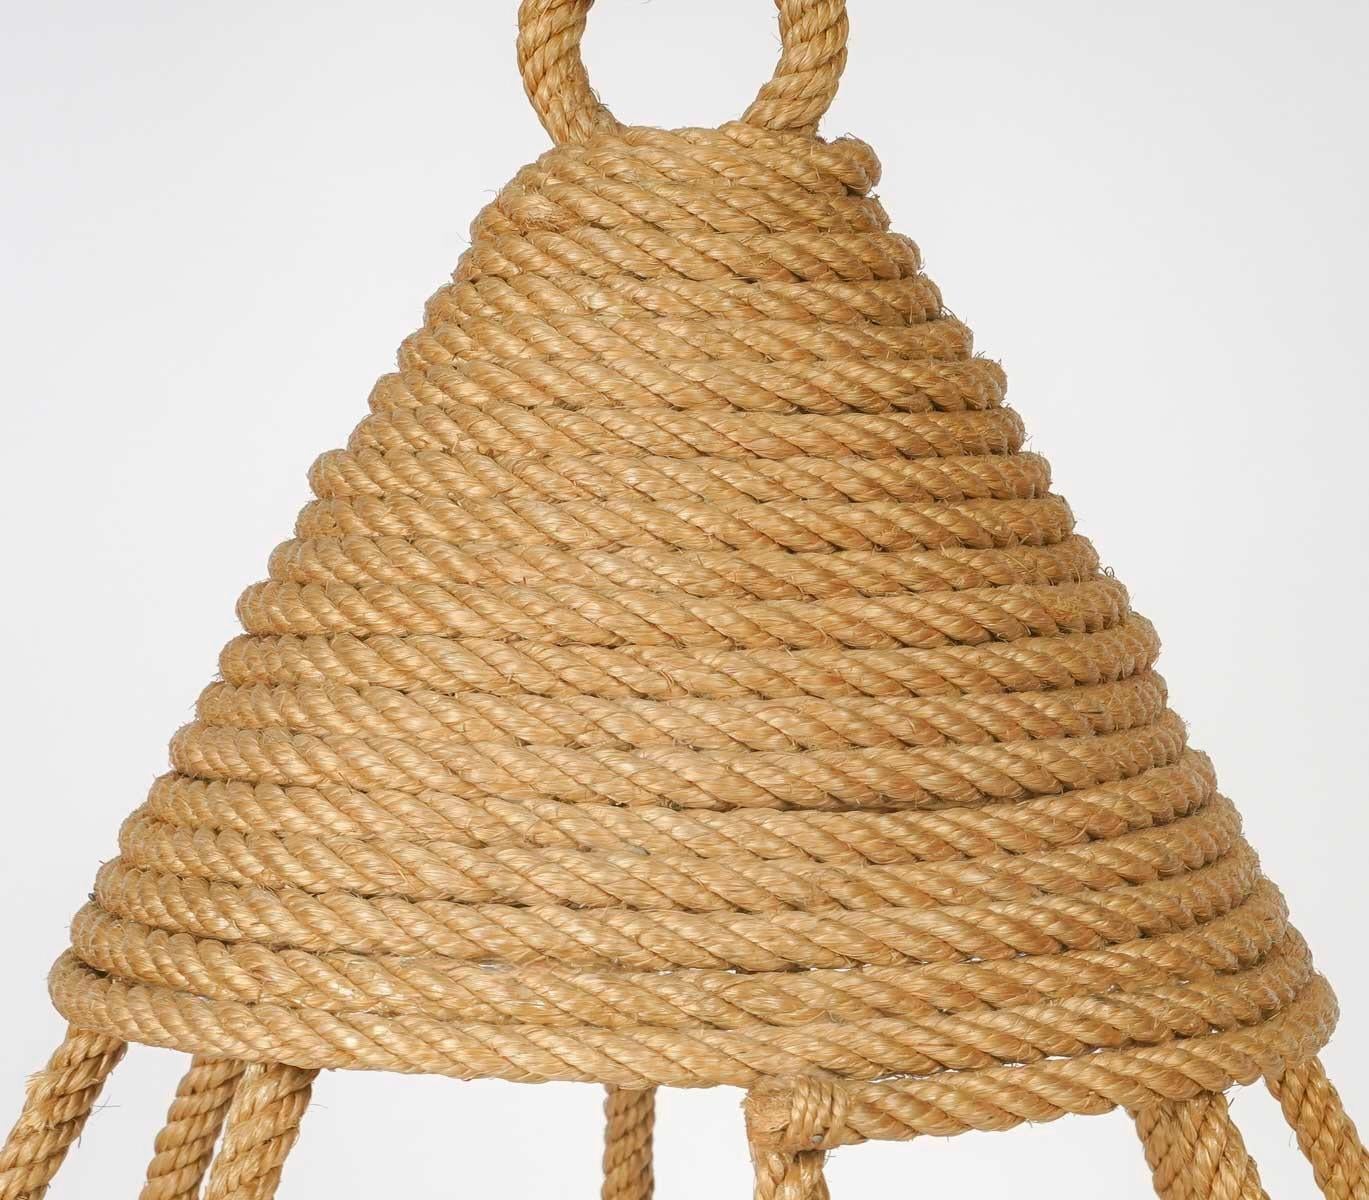 Composed of a central rope stem on which rests a lantern clad with a pointed rope hat wound at the top and decorated at the bottom with vertically placed curved rope stems, forming a cage around the lantern.
At the bottom, the rods meet and are held